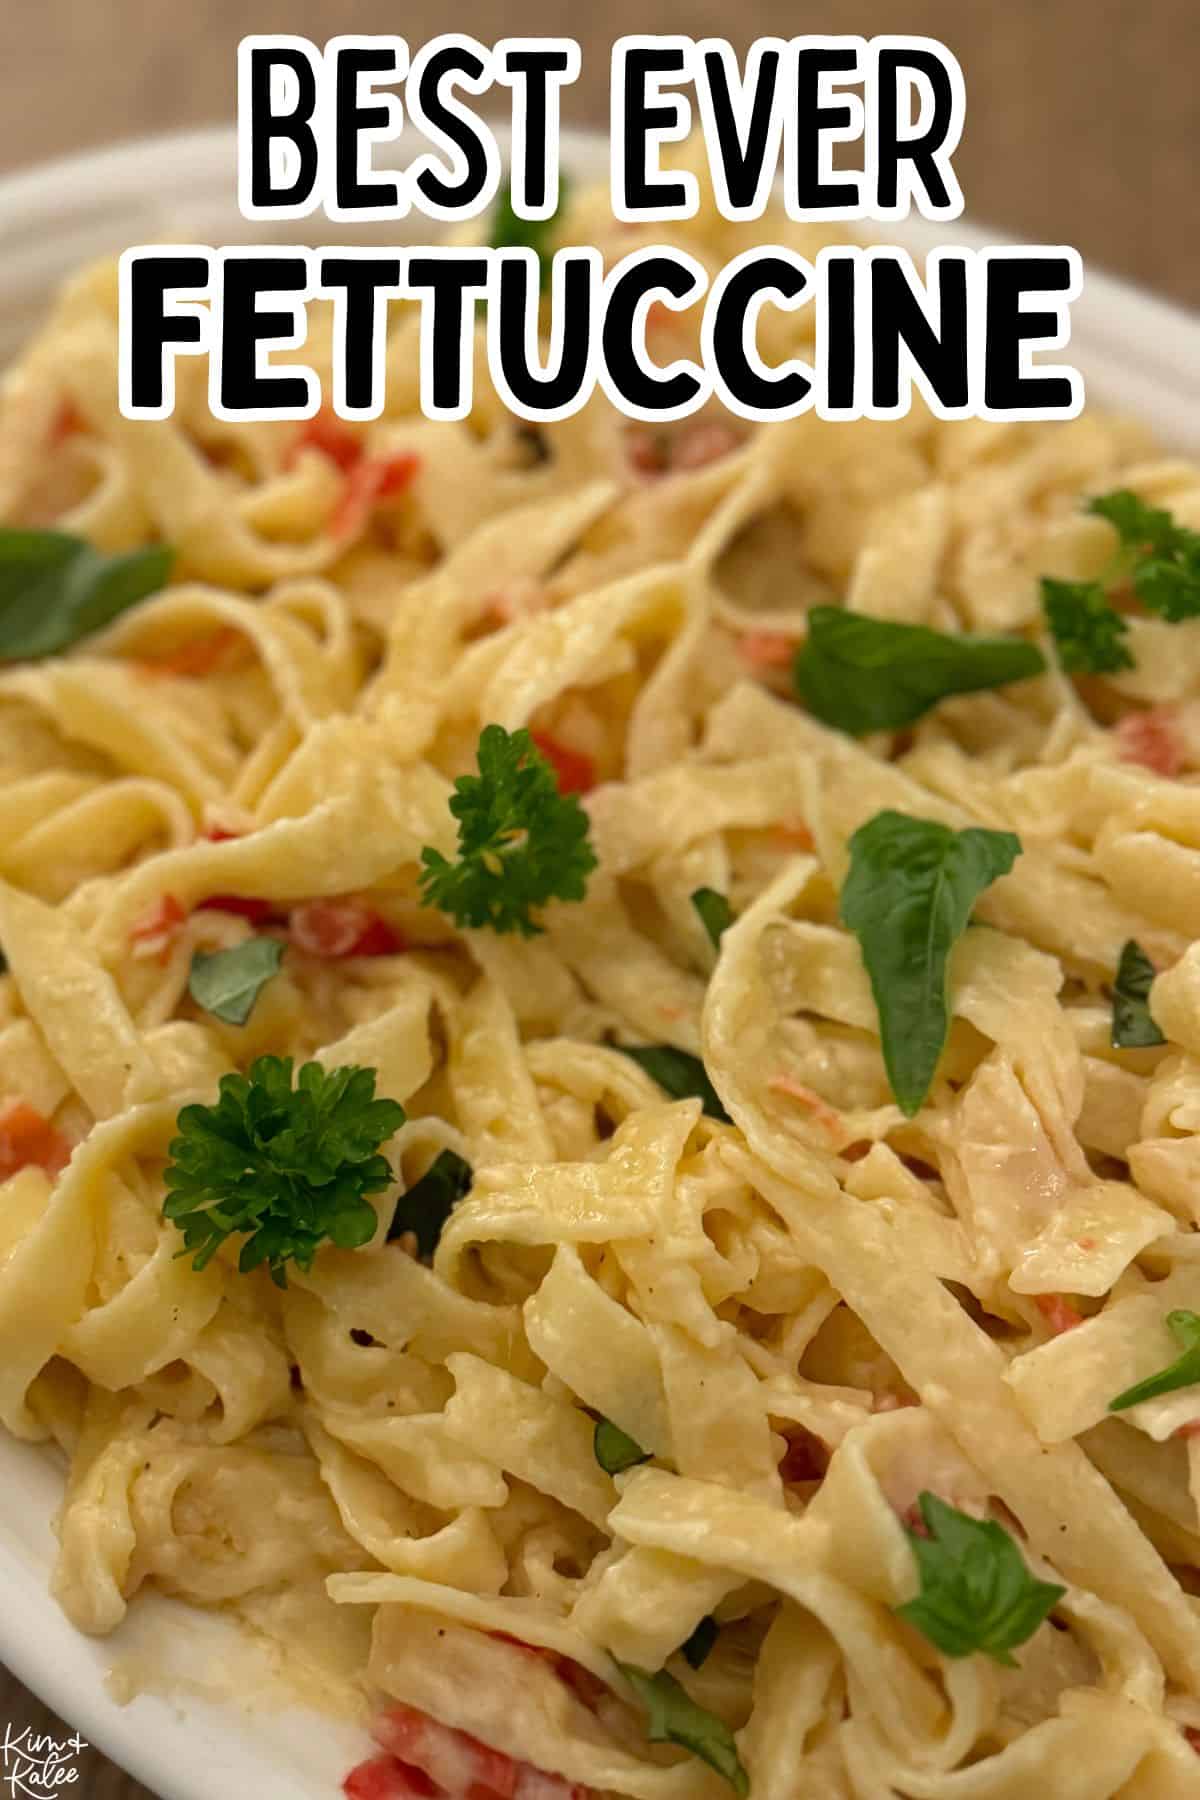 the finished recipe with the text overlay: Best ever fettuccine